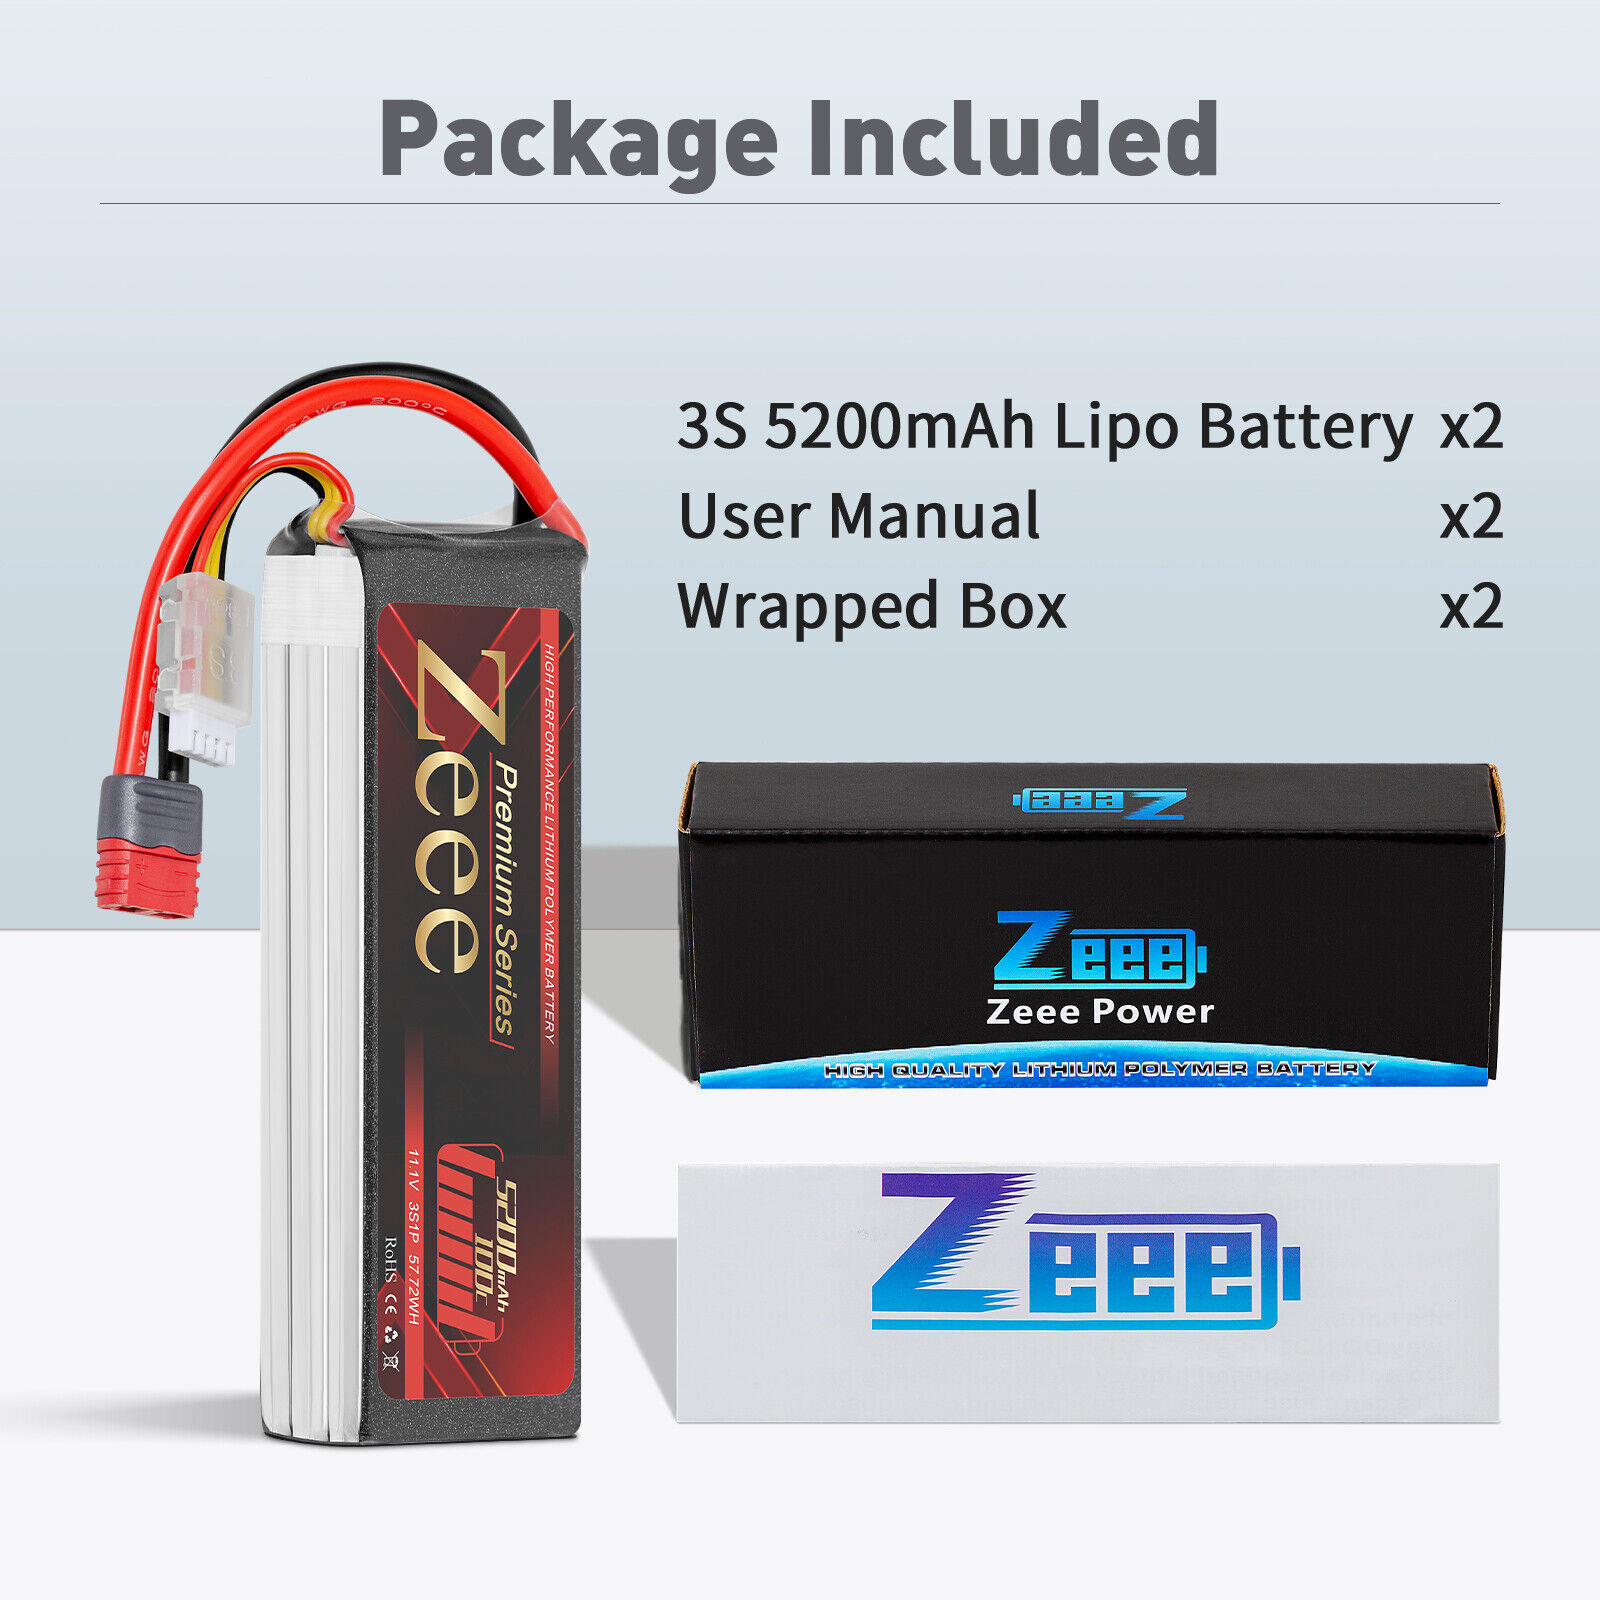 2x Zeee 3S LiPo Battery 11.1V 100C 5200mAh Deans for RC Car Helicopter Truck ZEEE Does Not Apply - фотография #6